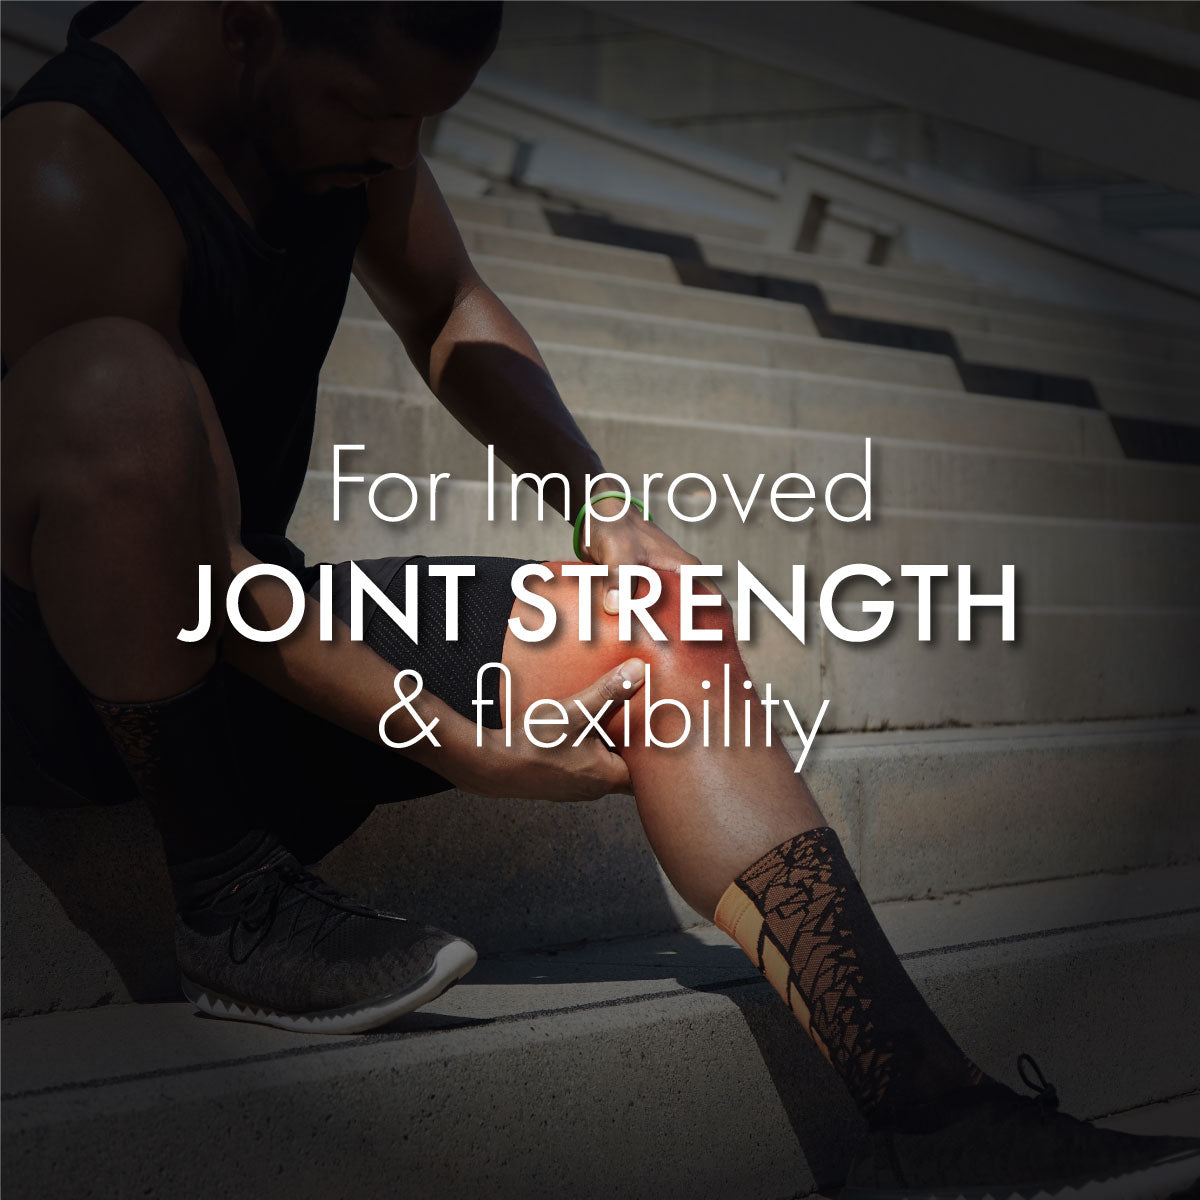 Joint Pain Relief Pack: For Quick Relief From Muscle & Joint Pain